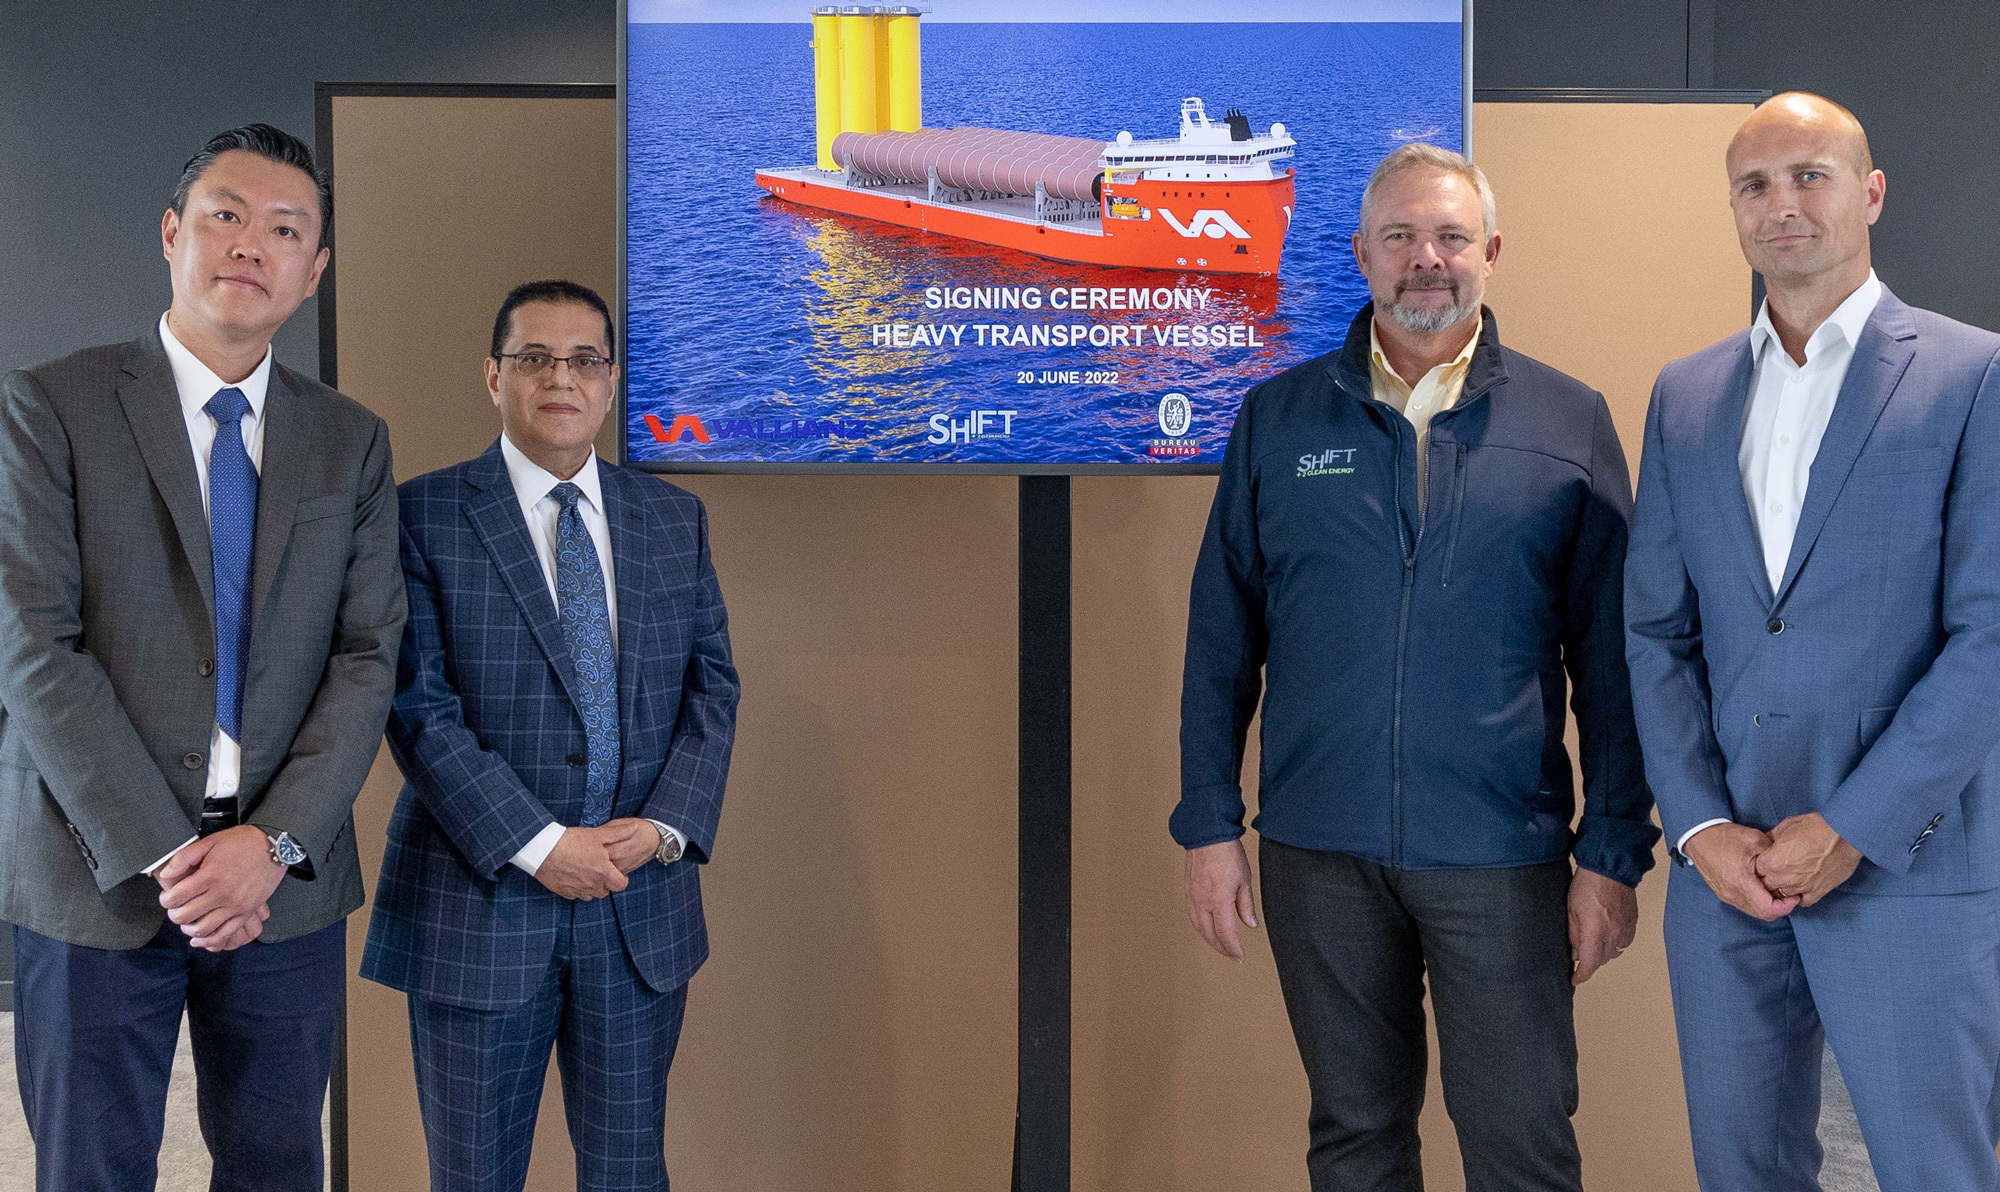 A signing ceremony was held in Ulstein's Rotterdam offices. From left to right: Mr Francis Tang, Commercial Director of Bureau Veritas Marine Singapore, Mr Osman Ibrahim, Chairman of Vallianz Holdings Ltd, Mr Brent Perry, CEO of Shift Clean Energy, Mr Edwin van Leeuwen, Managing Director of Ulstein Design & Solutions B.V. Photo: Emiel Lops.